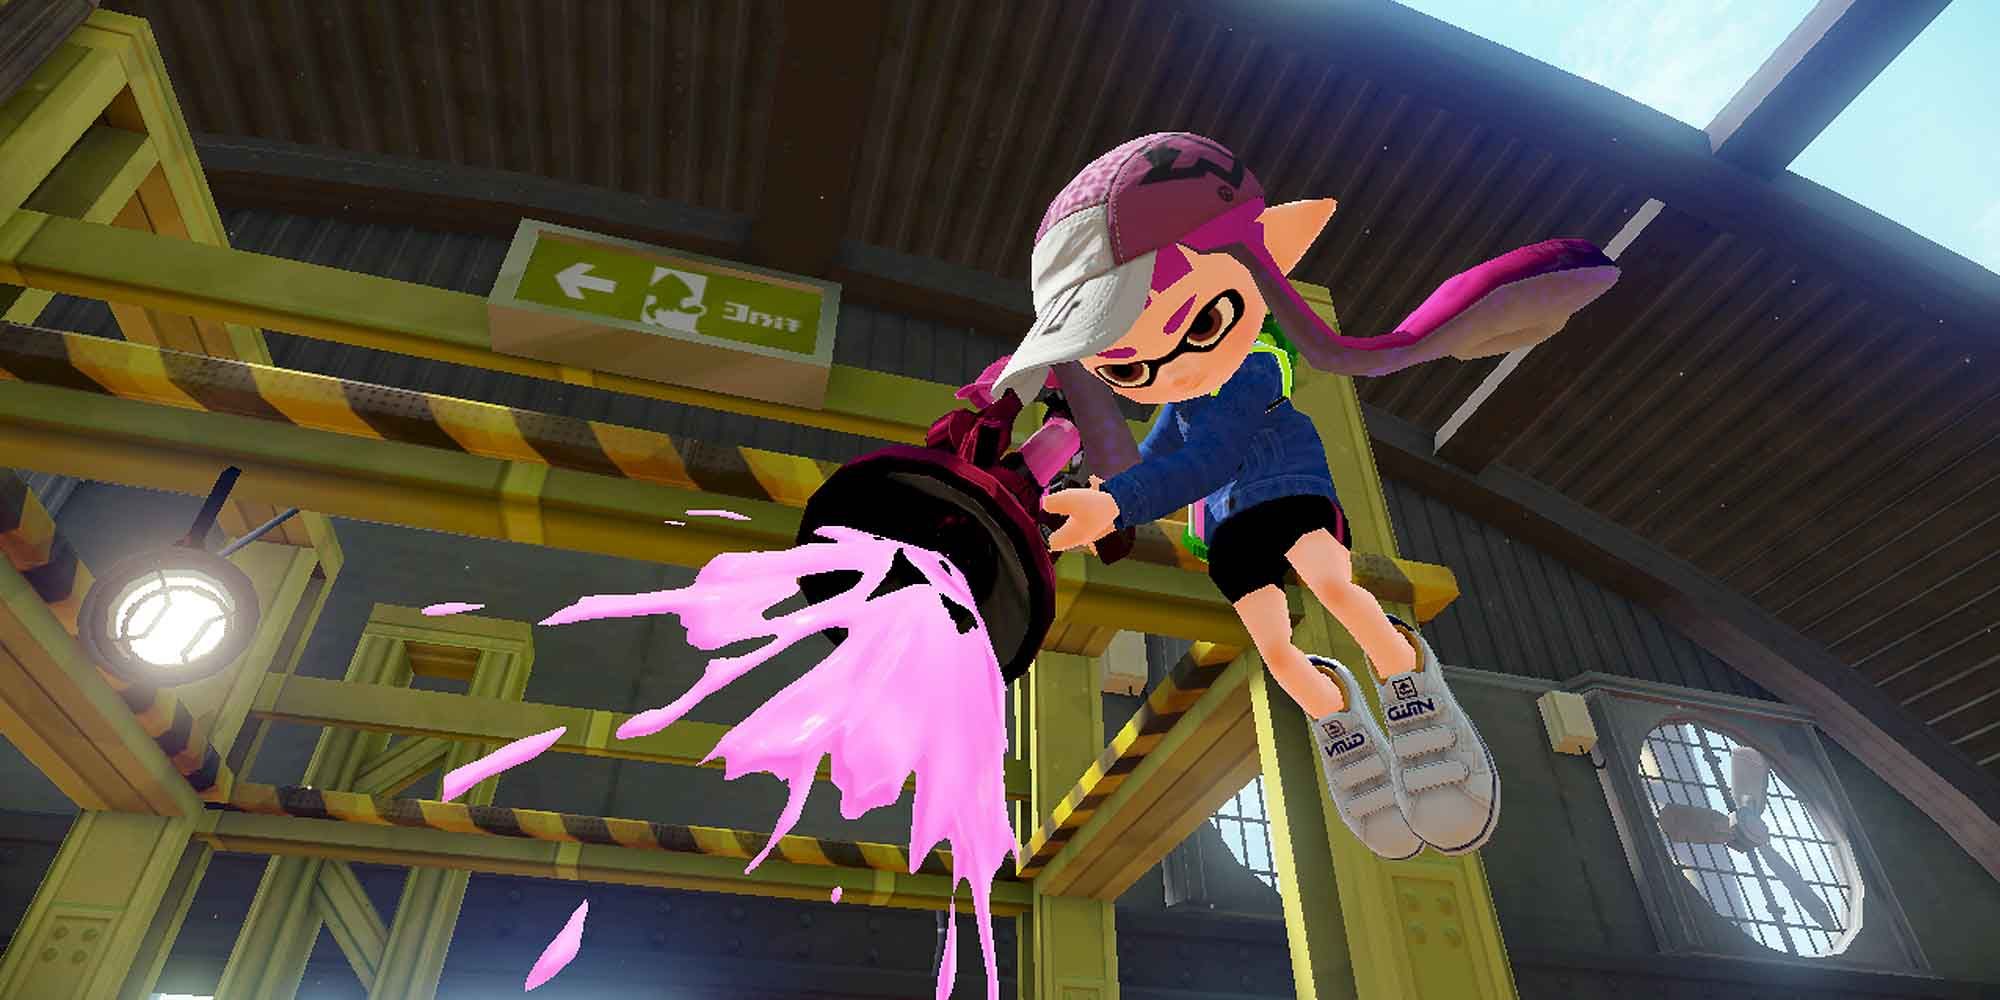 The White 3-Strap shoes in Splatoon 3